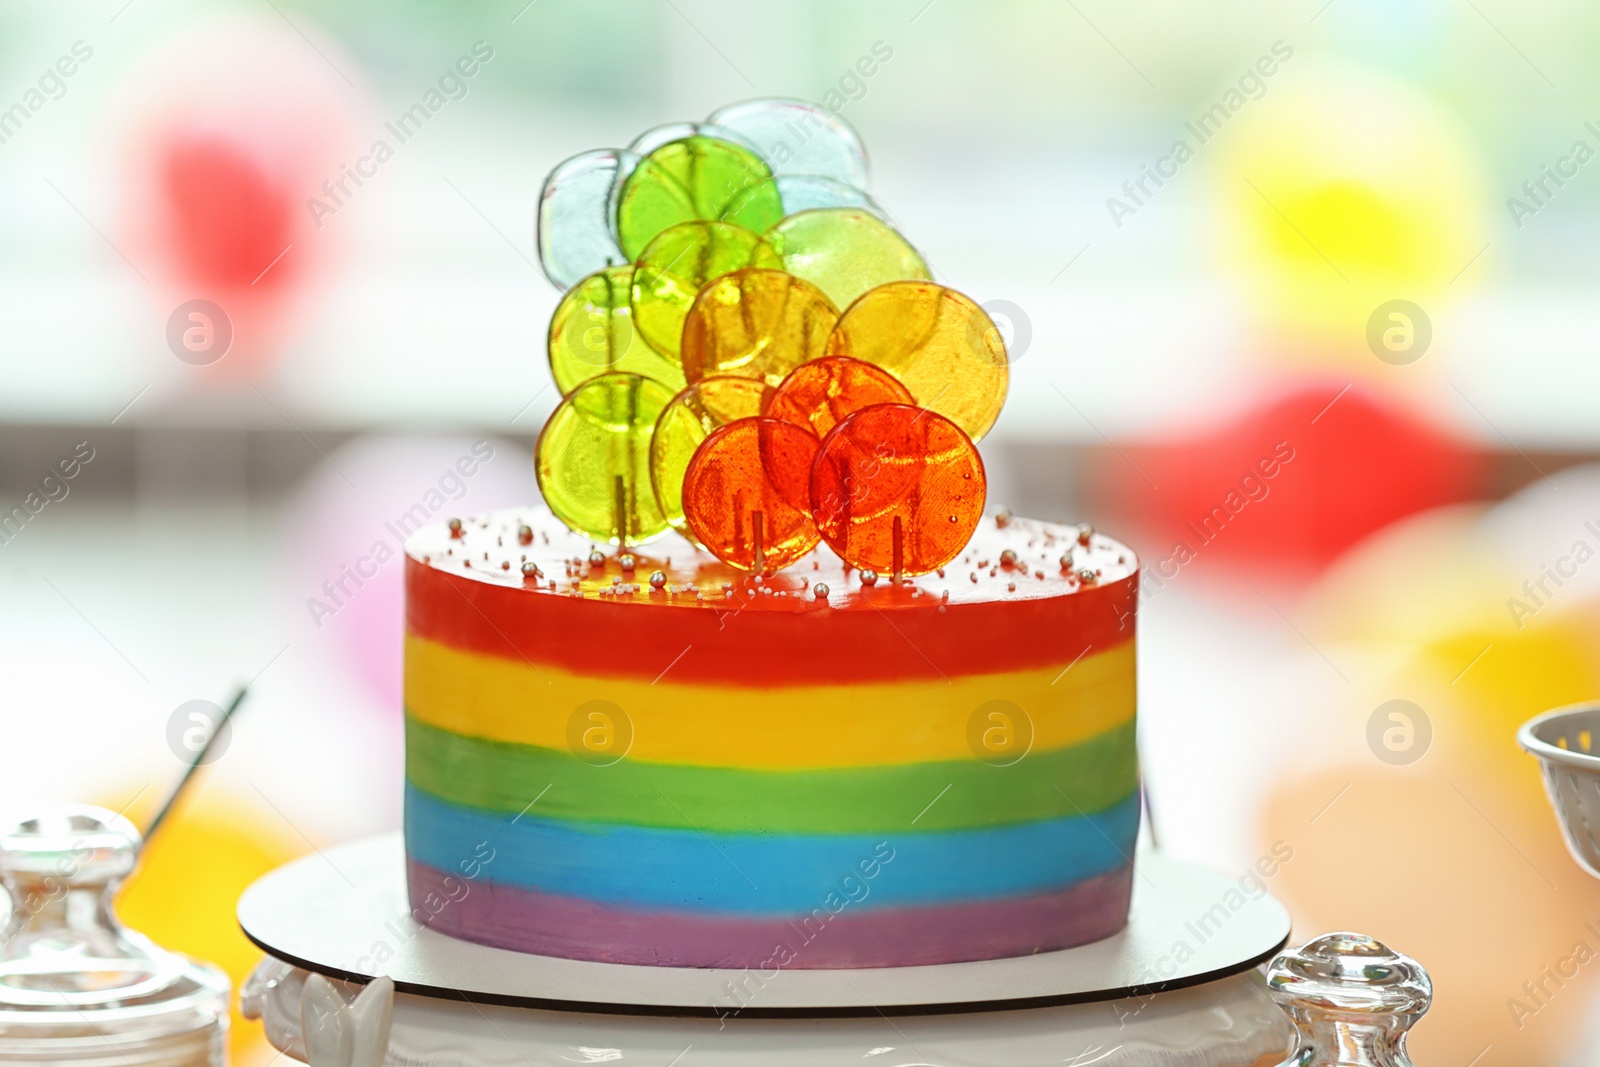 Photo of Bright birthday cake on table in decorated room